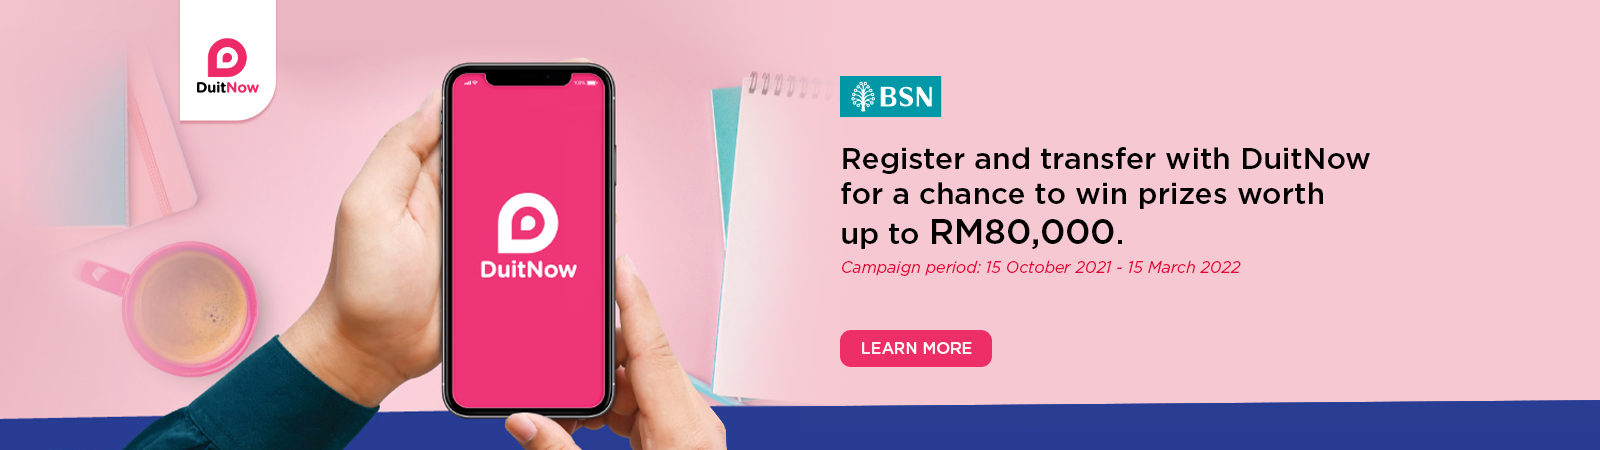 Register and transfer with DuitNow for a chance to win prizes worth up to RM80,000'
